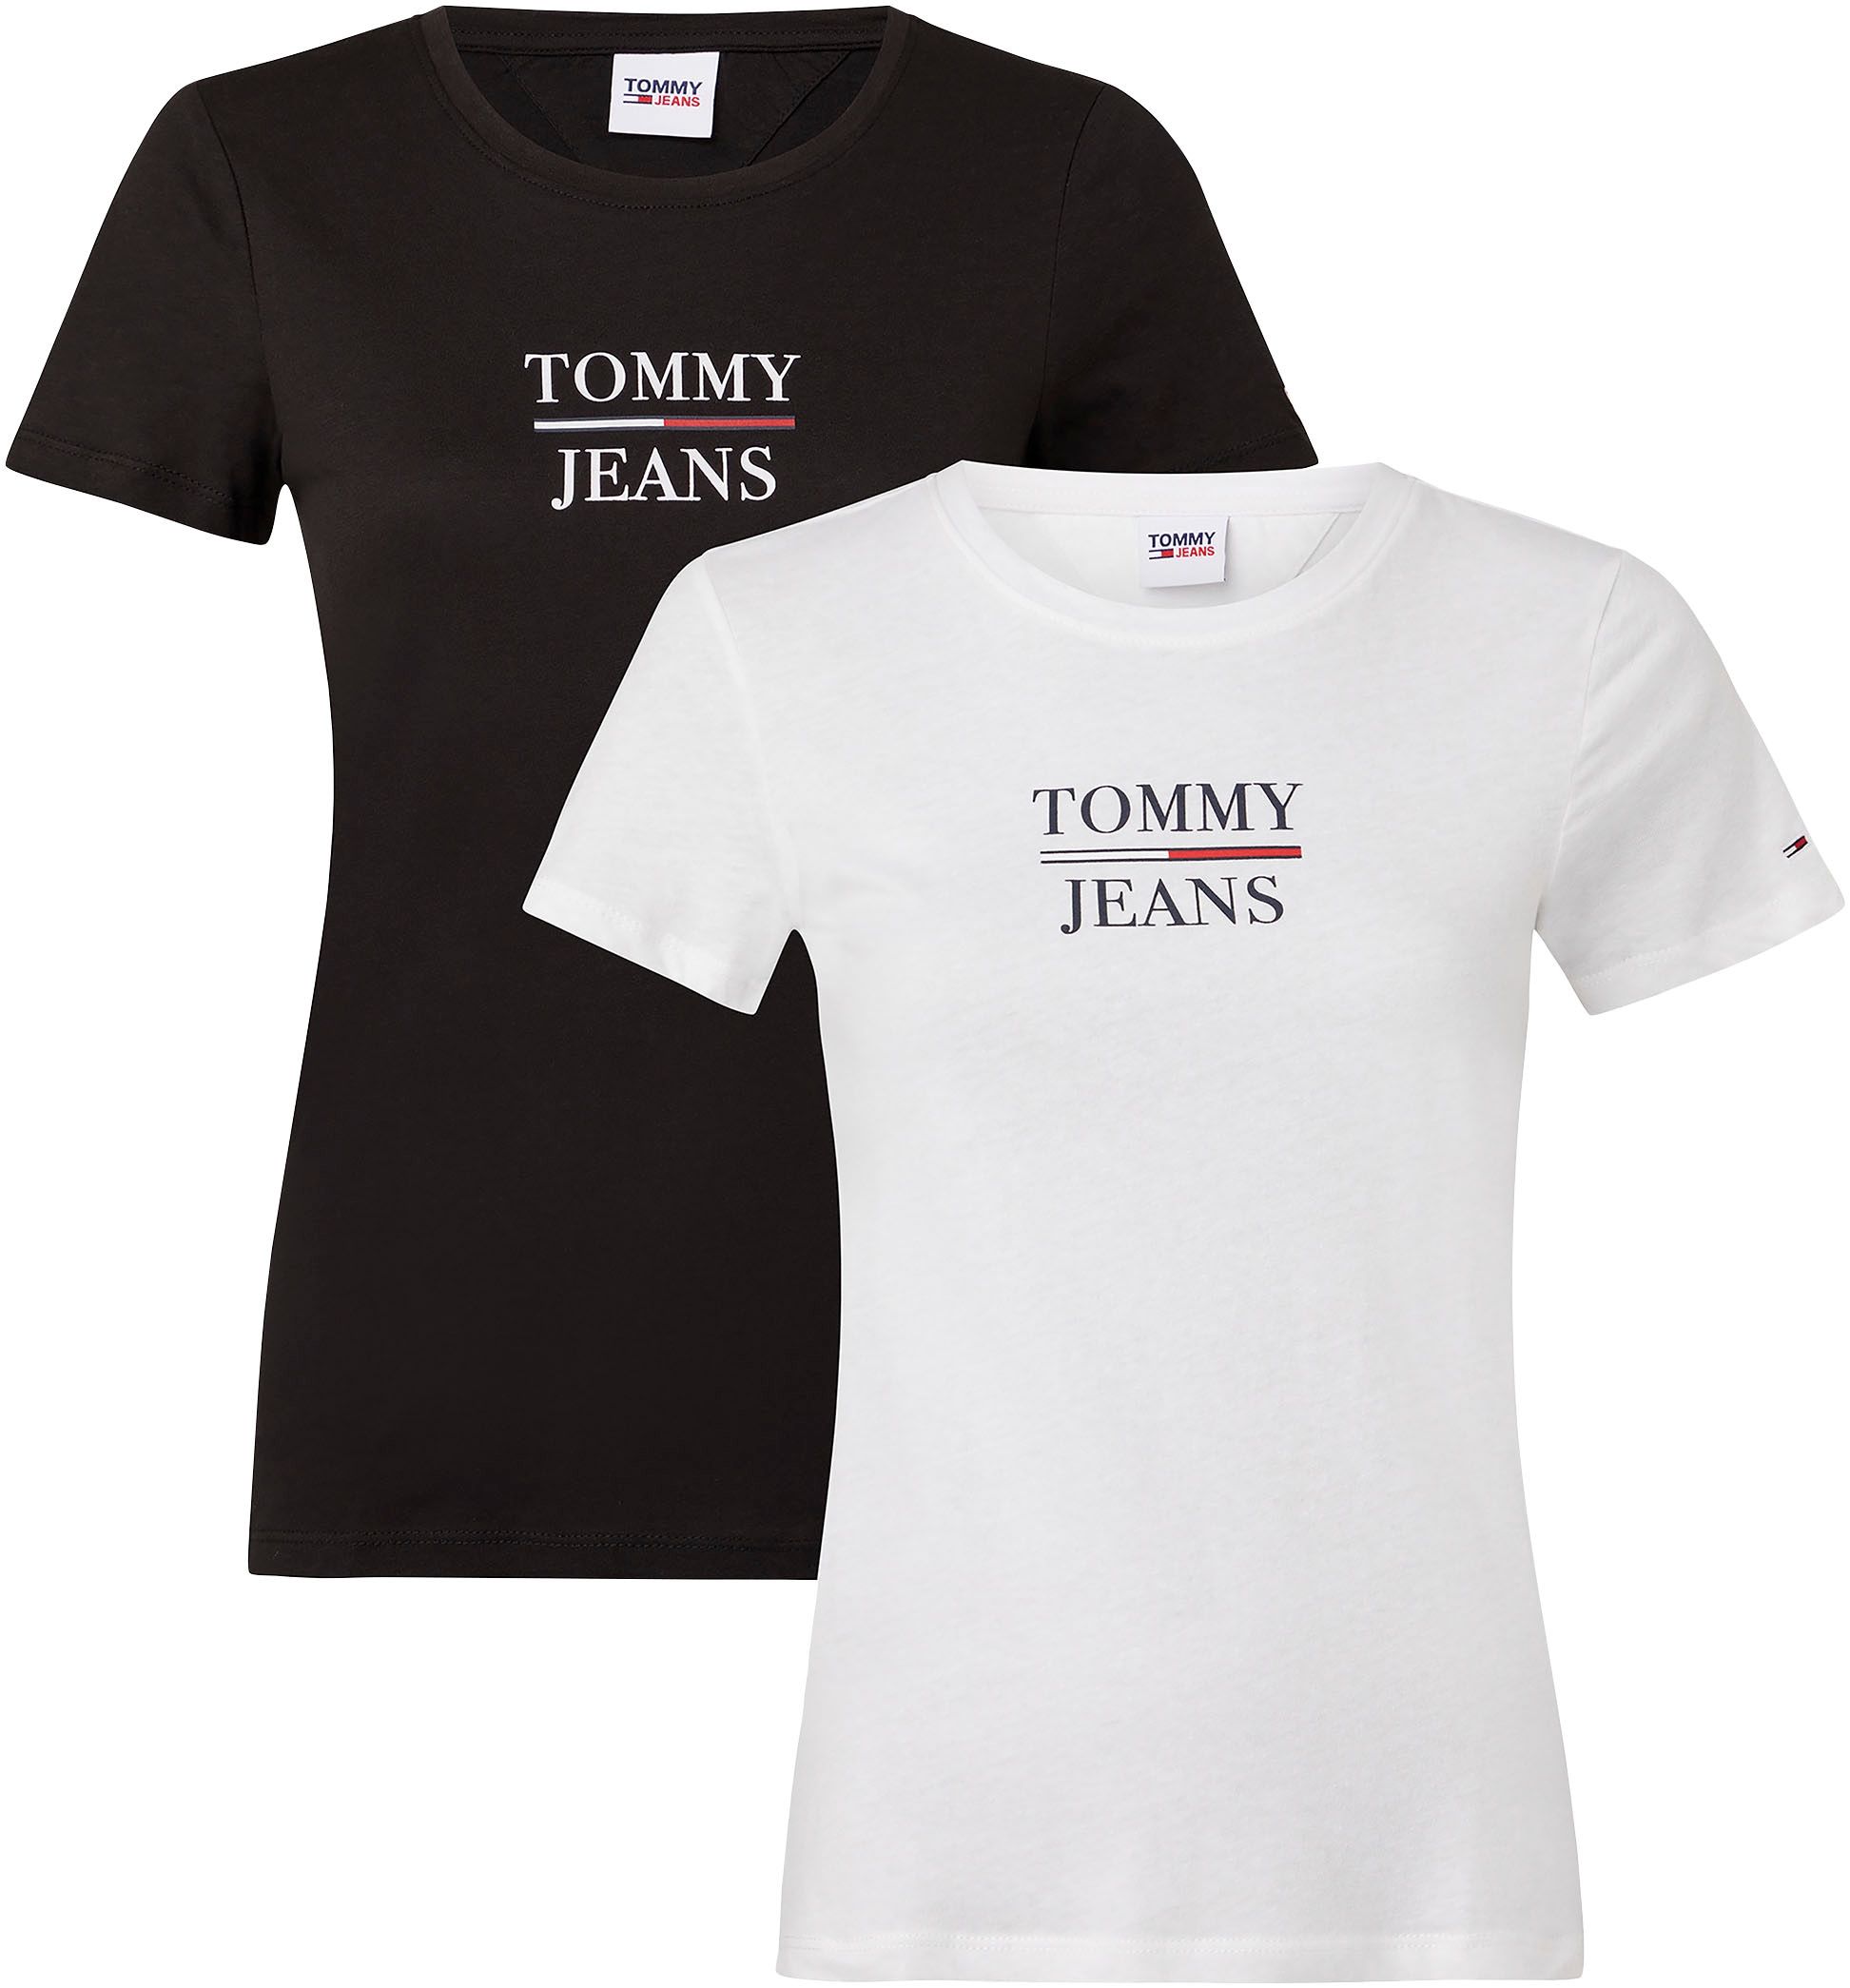 Tommy Jeans T-Shirt TOMMY | T 2er-Pack) (Packung, I\'m online kaufen ESS walking Skinny »TJW SS«, 2PACK